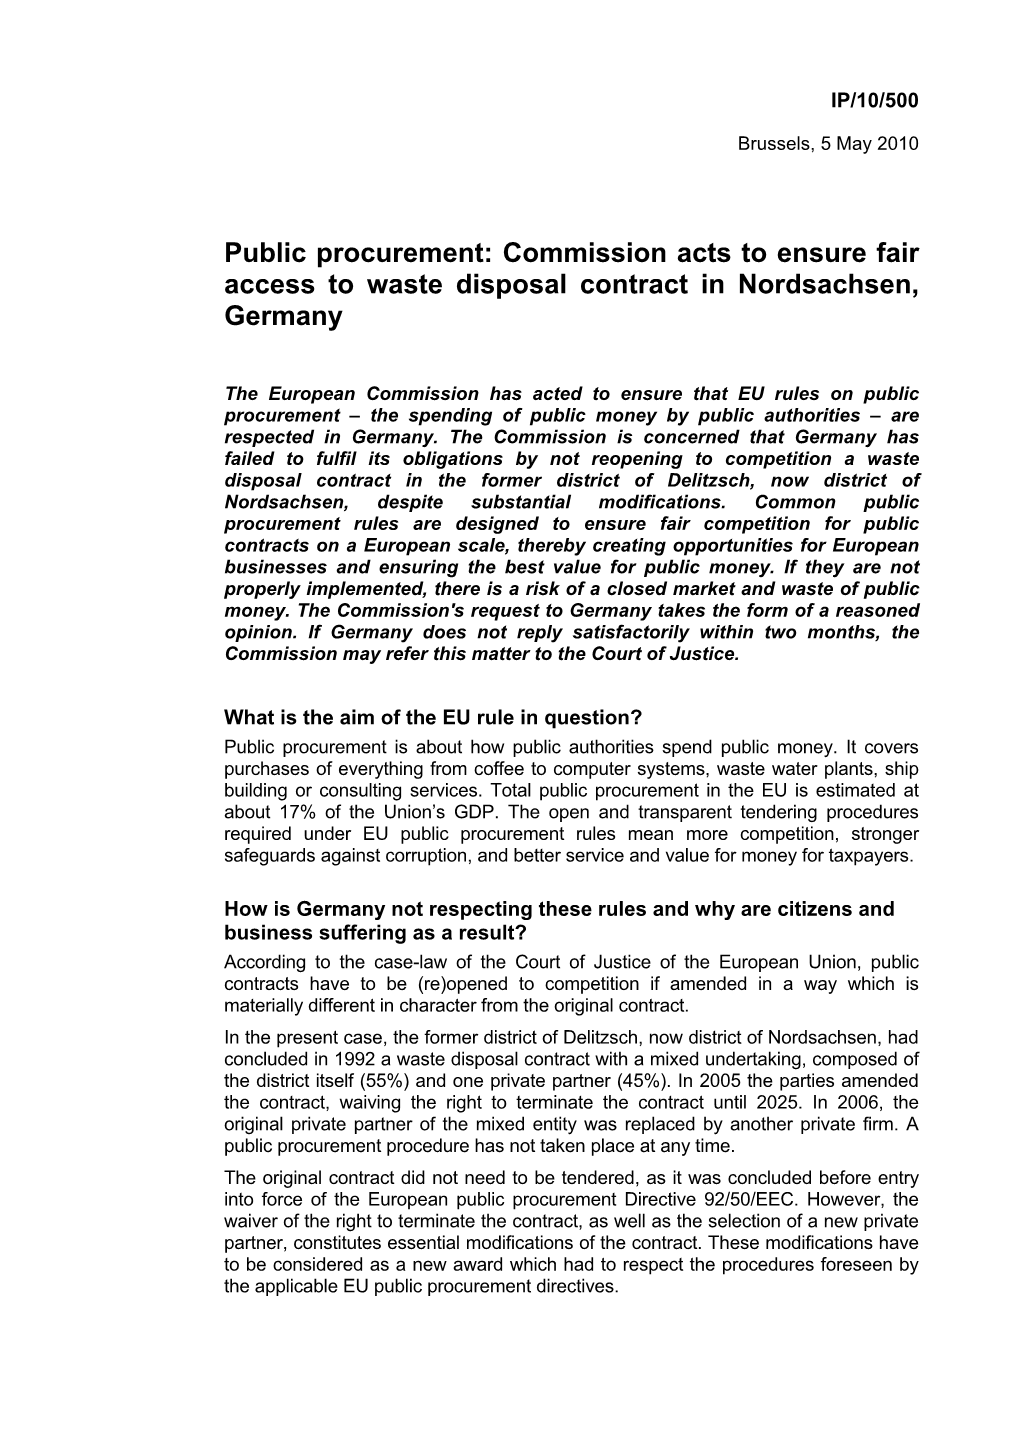 Public Procurement: Commission Acts to Ensure Fair Access to Waste Disposal Contract in Nordsachsen, Germany